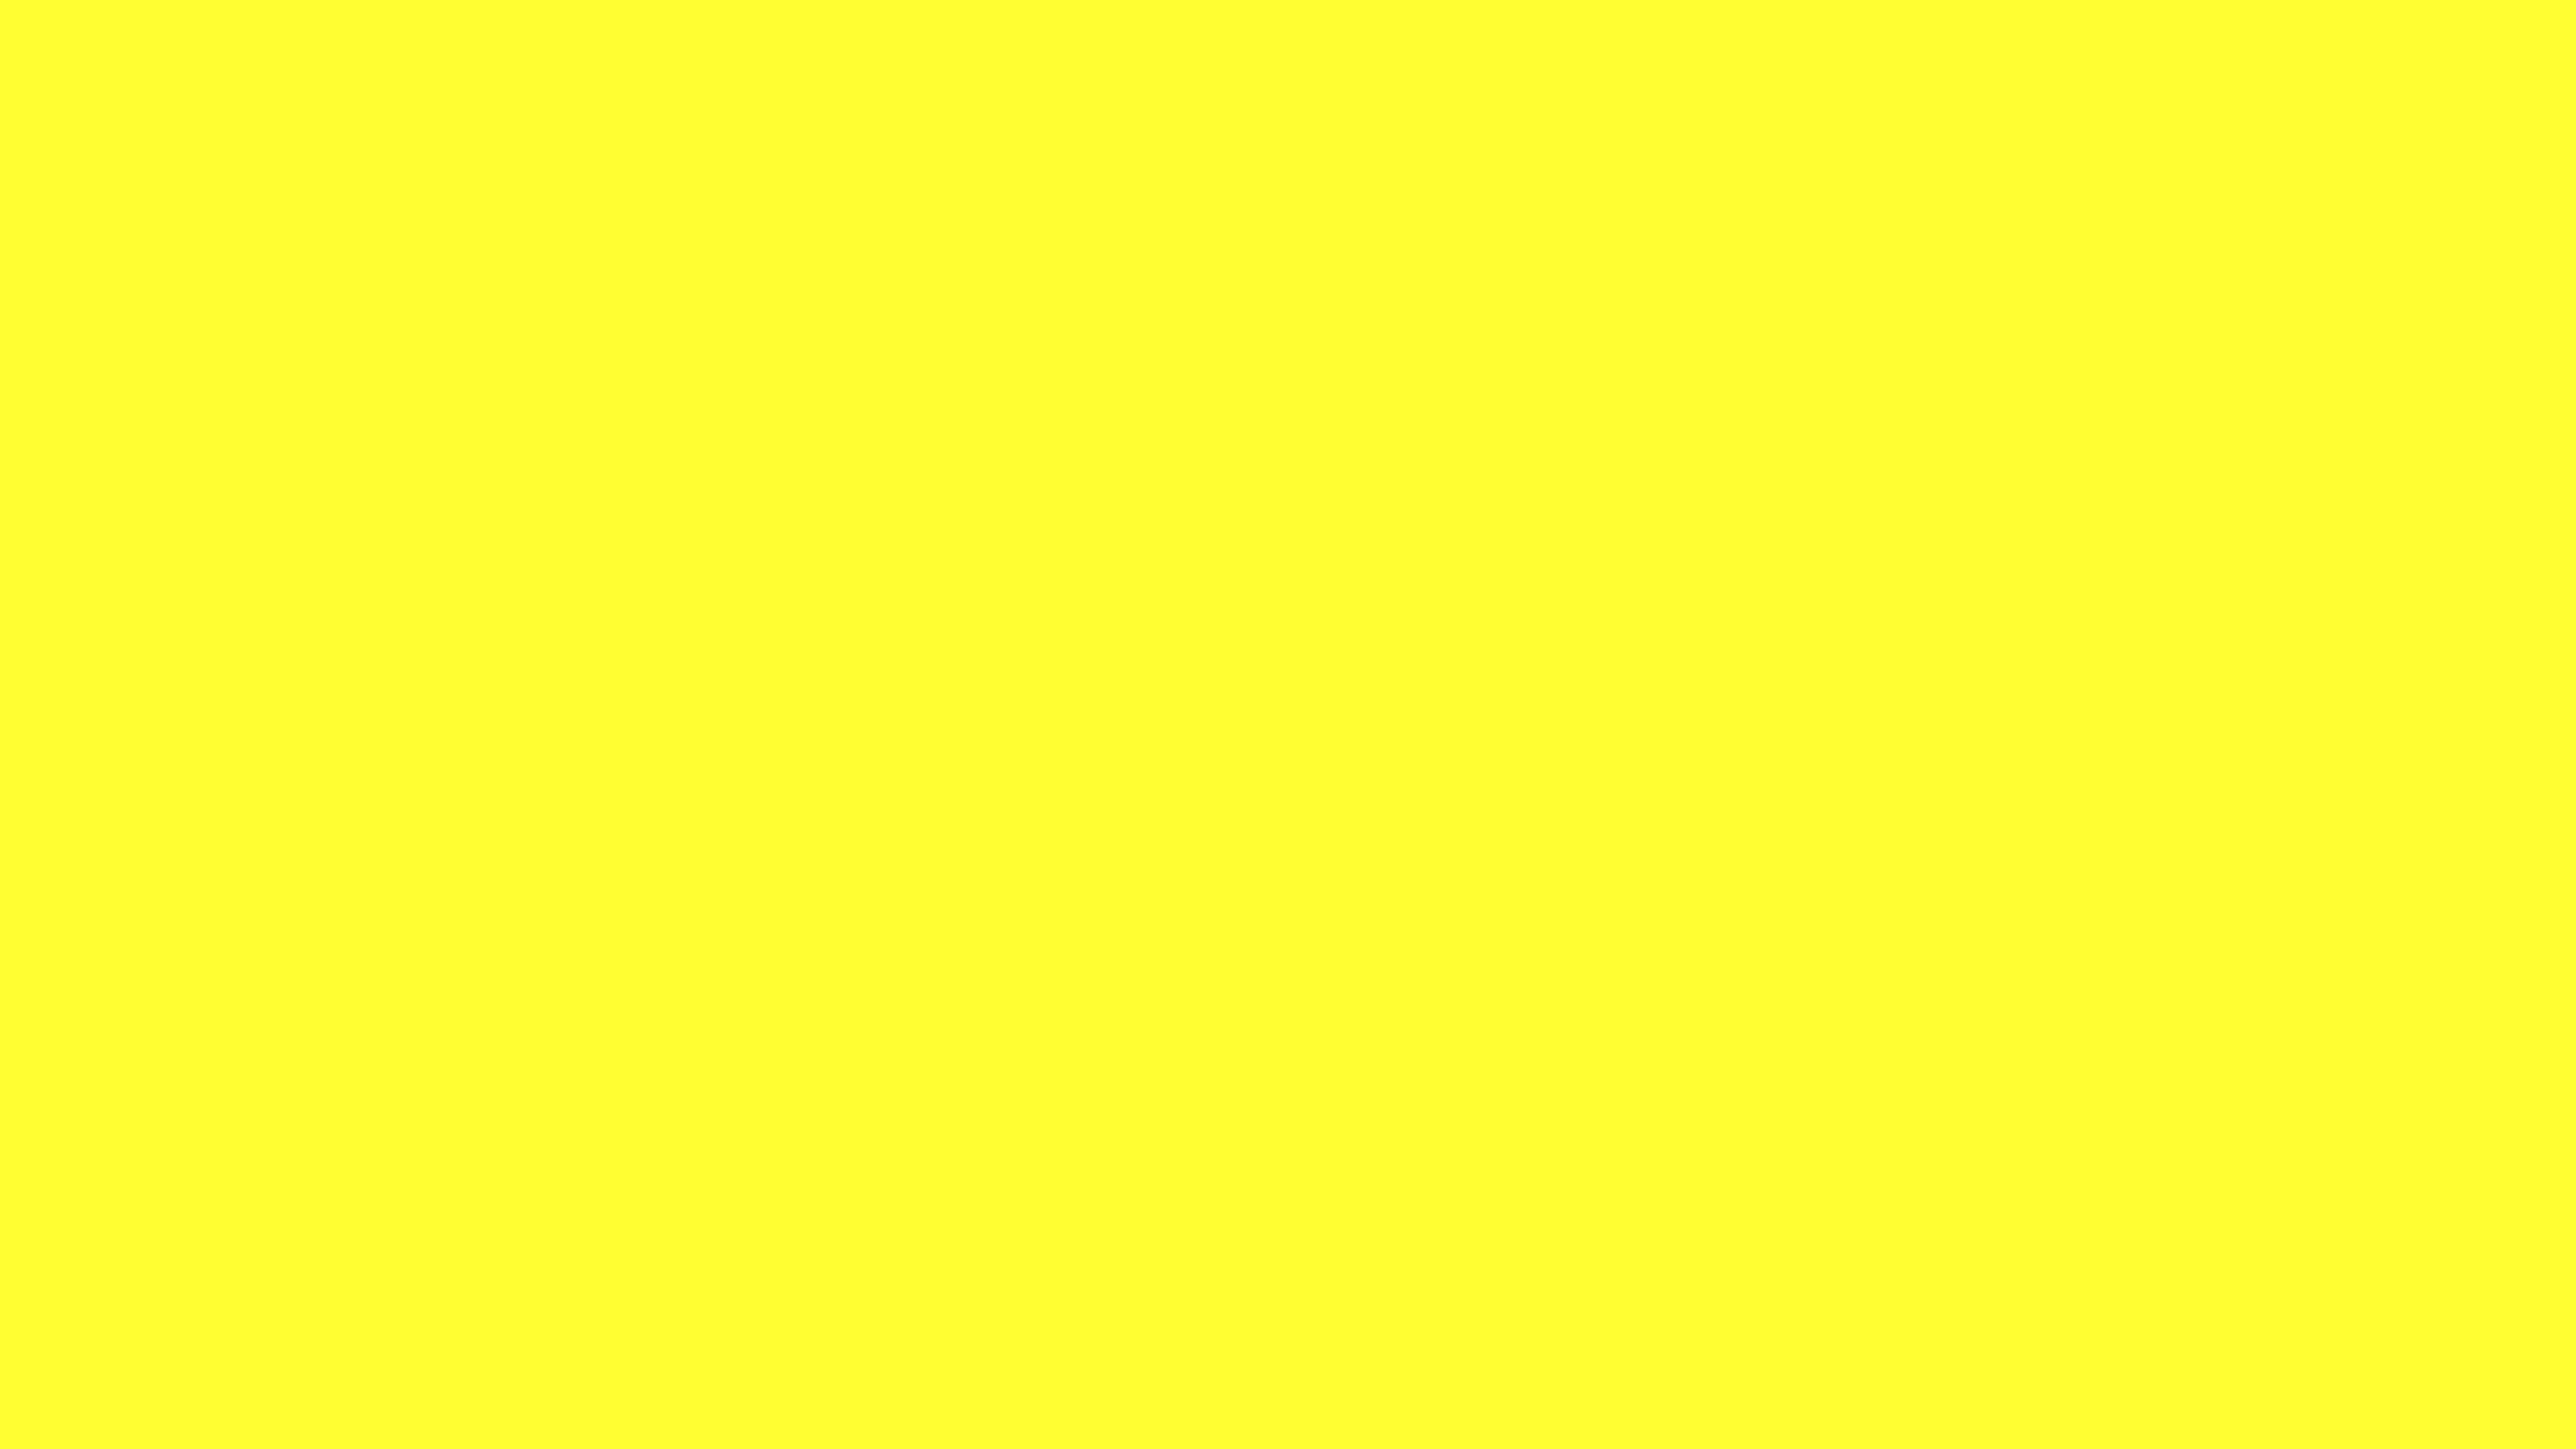 7680x4320 Yellow RYB Solid Color Background